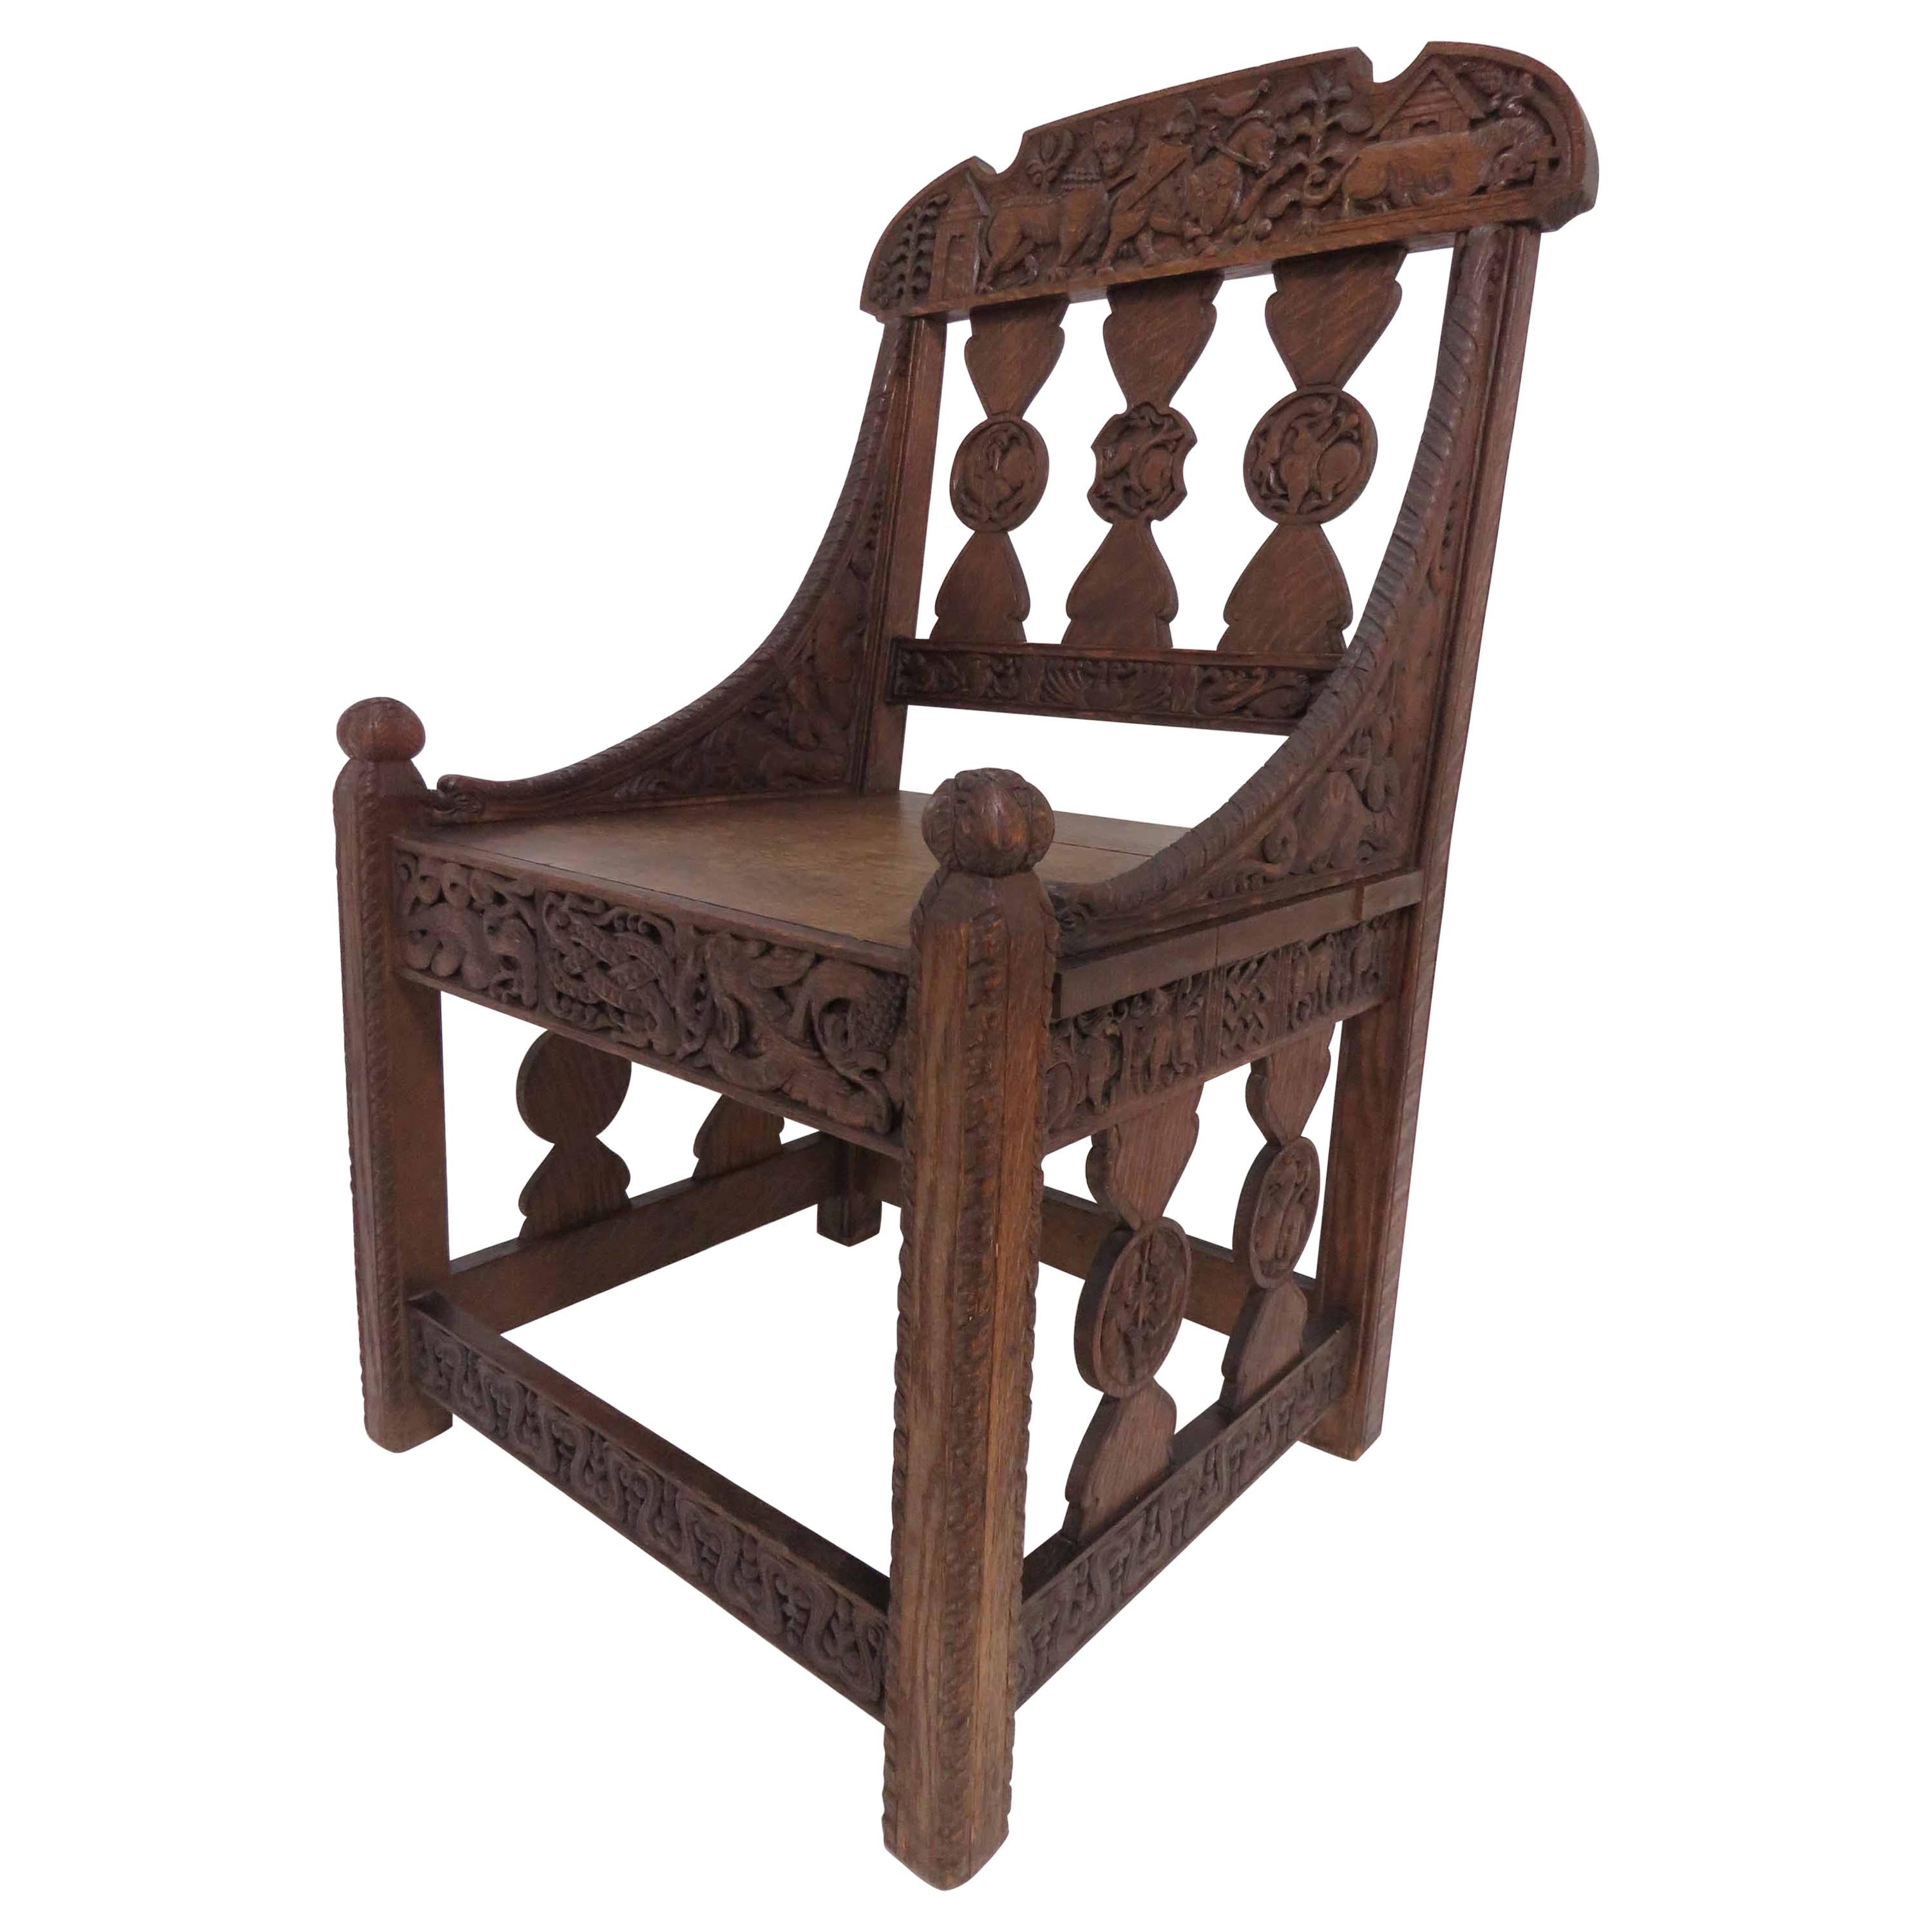 Hand Carved Arts & Crafts Gothic Revival Chair Signed and Dated 1903